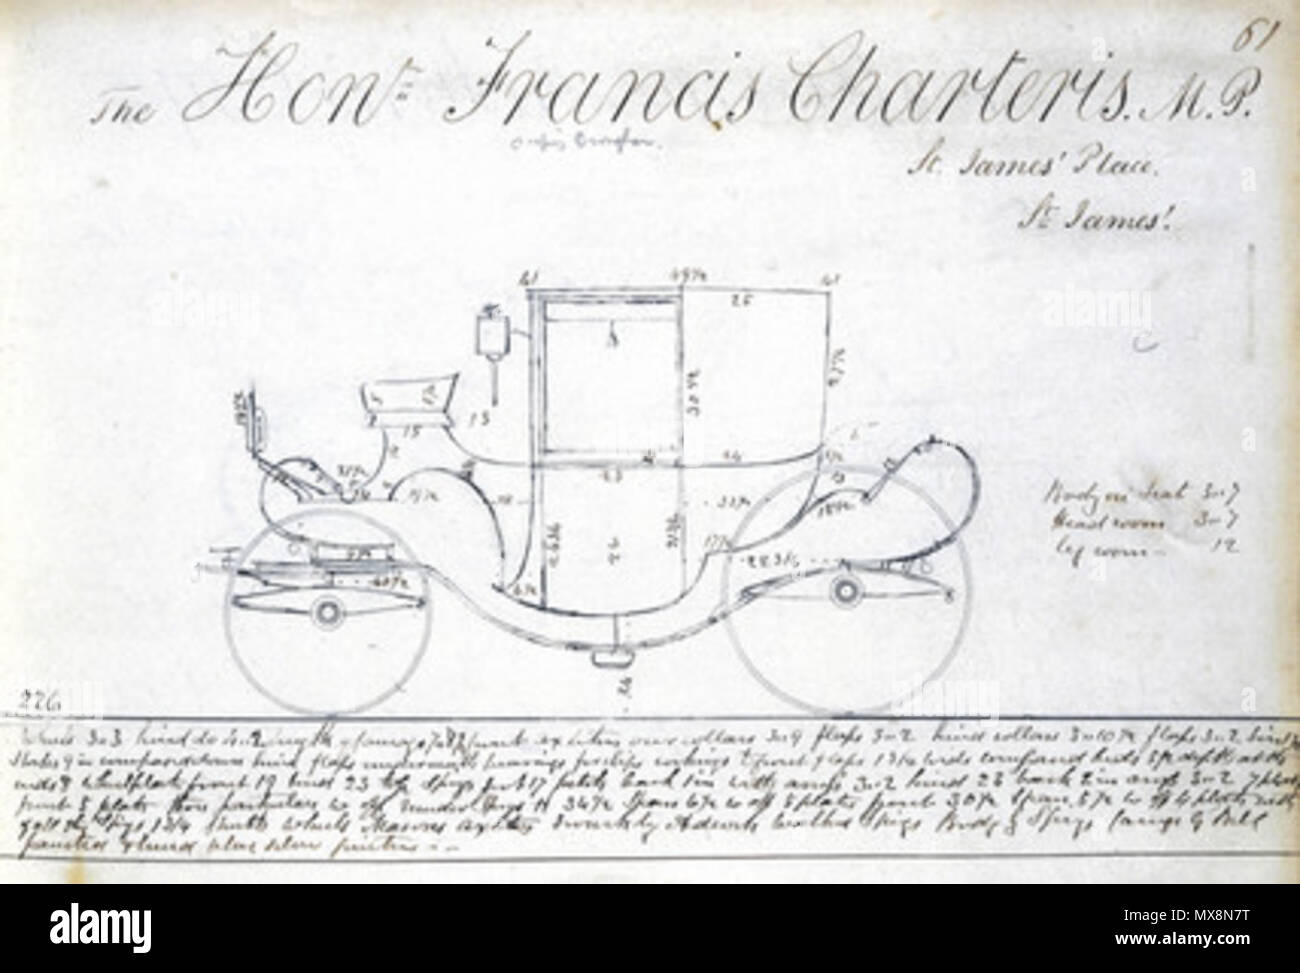 . Francis Charteris' carriage, c 1810-1873 Plate from 'Woodall's Coach Designs', produced between 1810 and 1873, showing a design for a four-wheeled carriage produced for Francis Charteris. 'Woodall's Coach Designs' is a bound volume containing draughtsman's drawings for Woodall the coachmaker of London. 19th century. Unattributed 216 Francis Charteris' carriage, c 1810-1873 Stock Photo